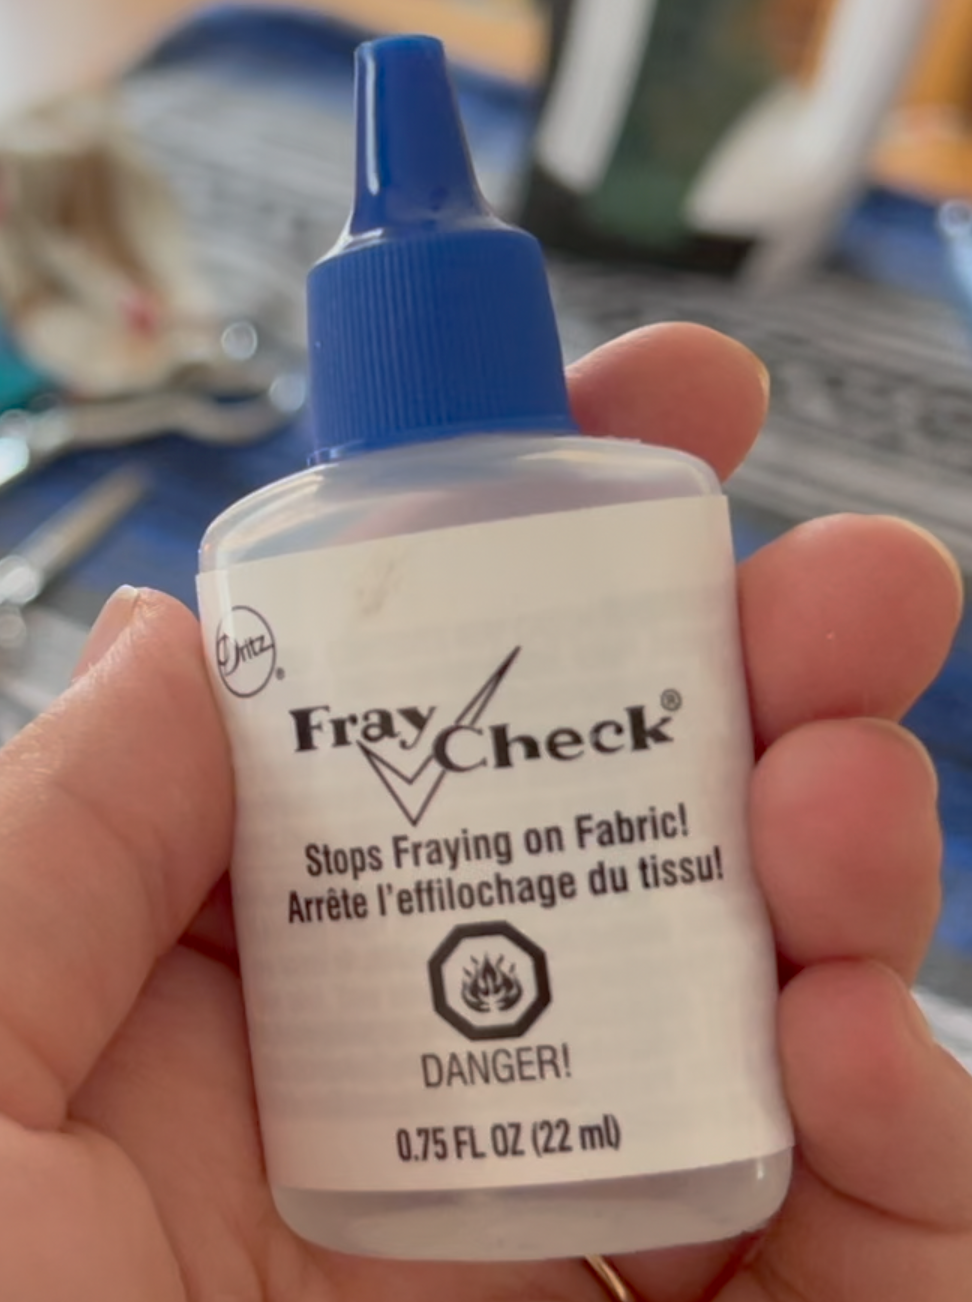 A squeeze bottle of Fray Check